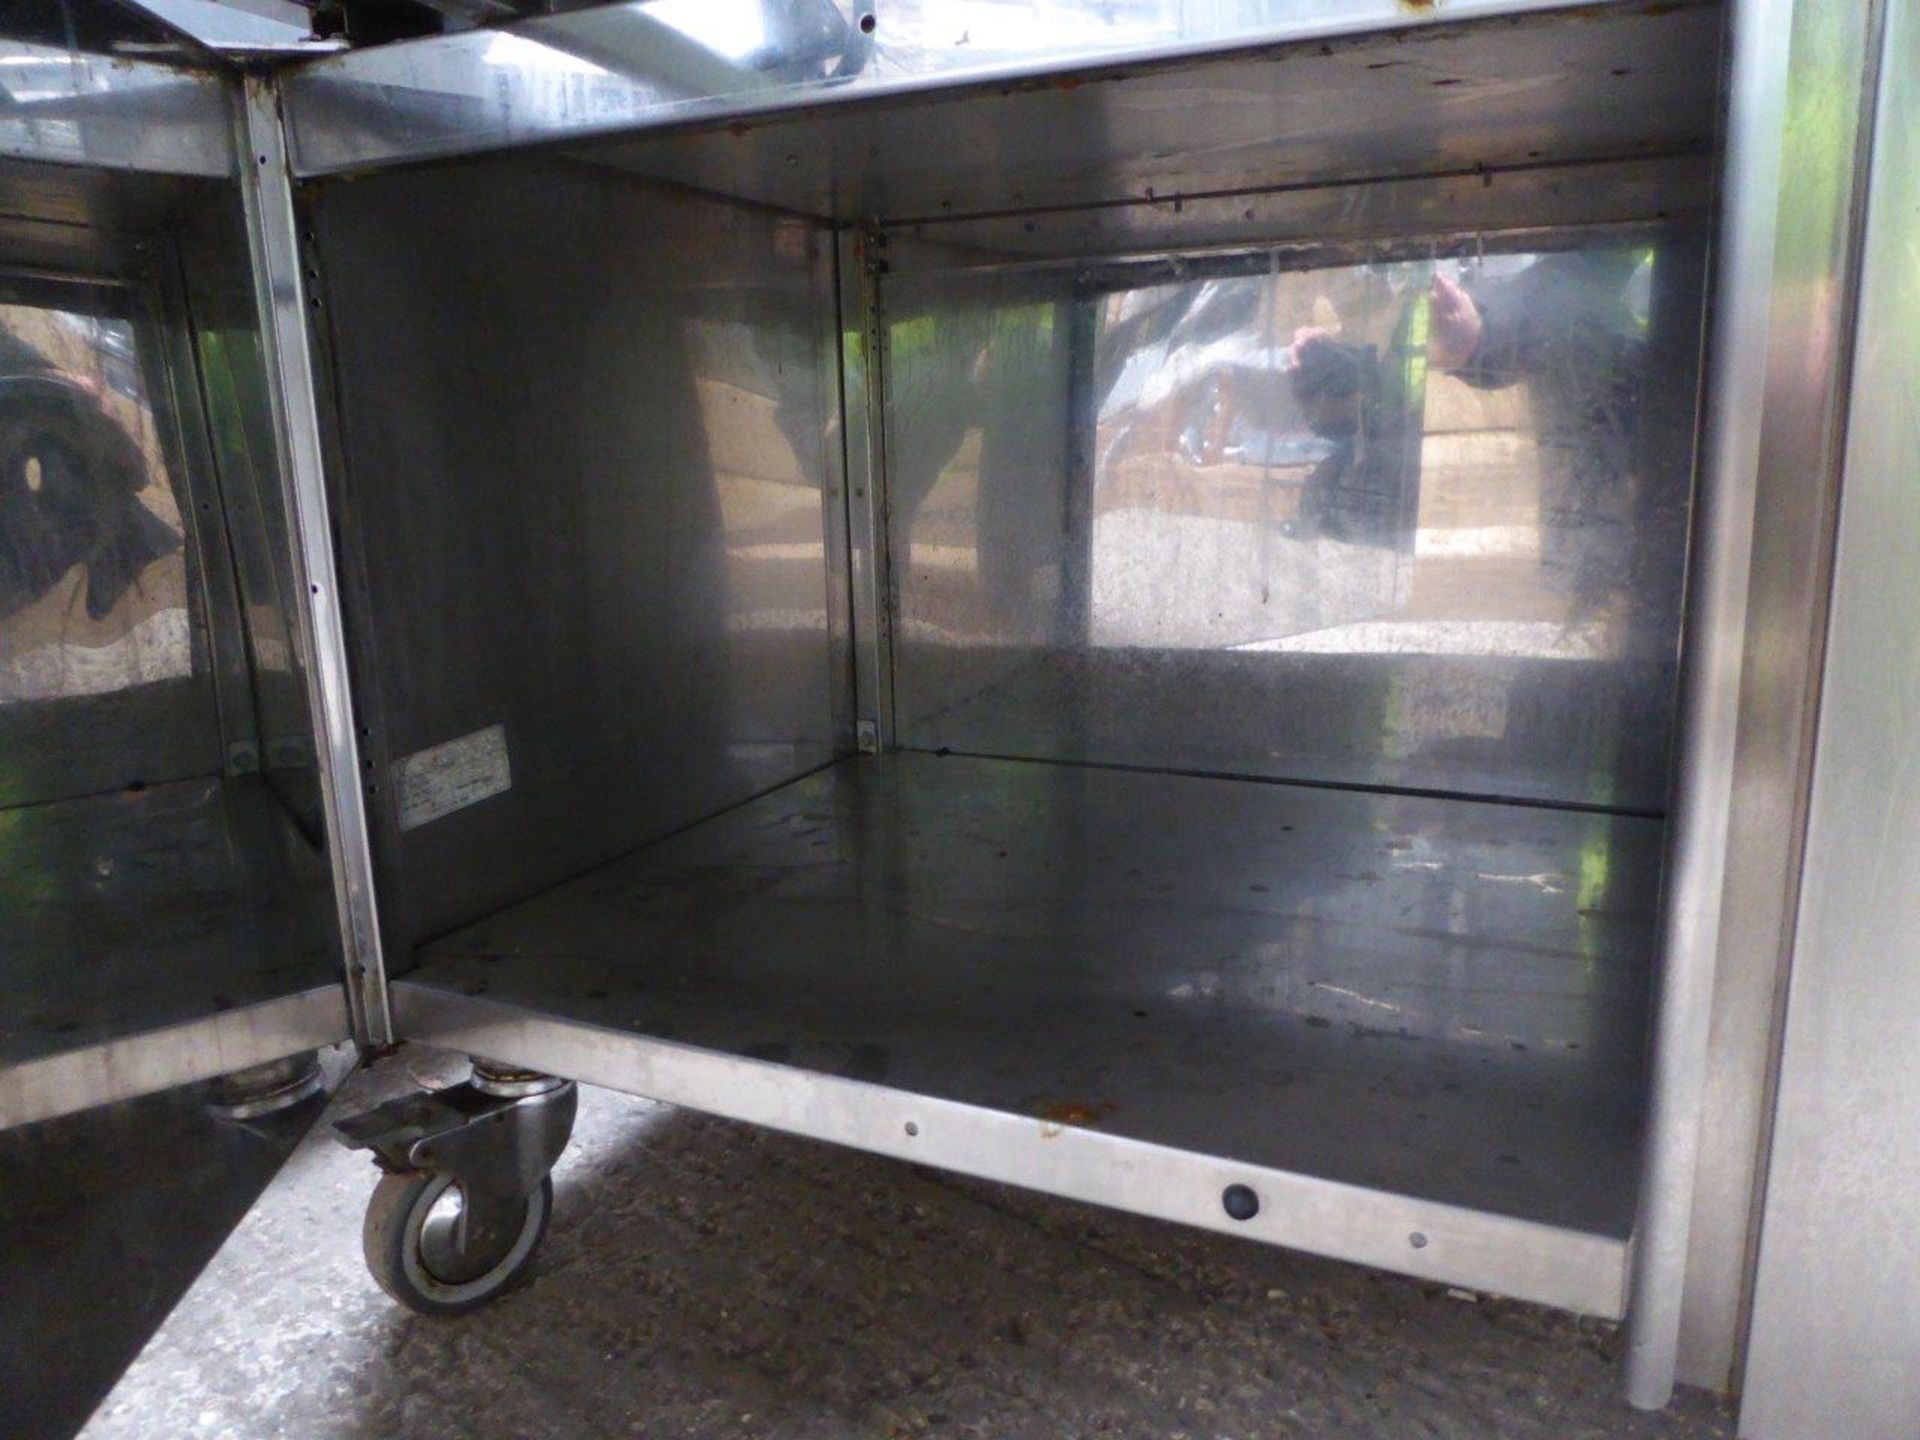 Double fryer and hot plate unit with under warmer. Estimate £450-480 - Image 3 of 4